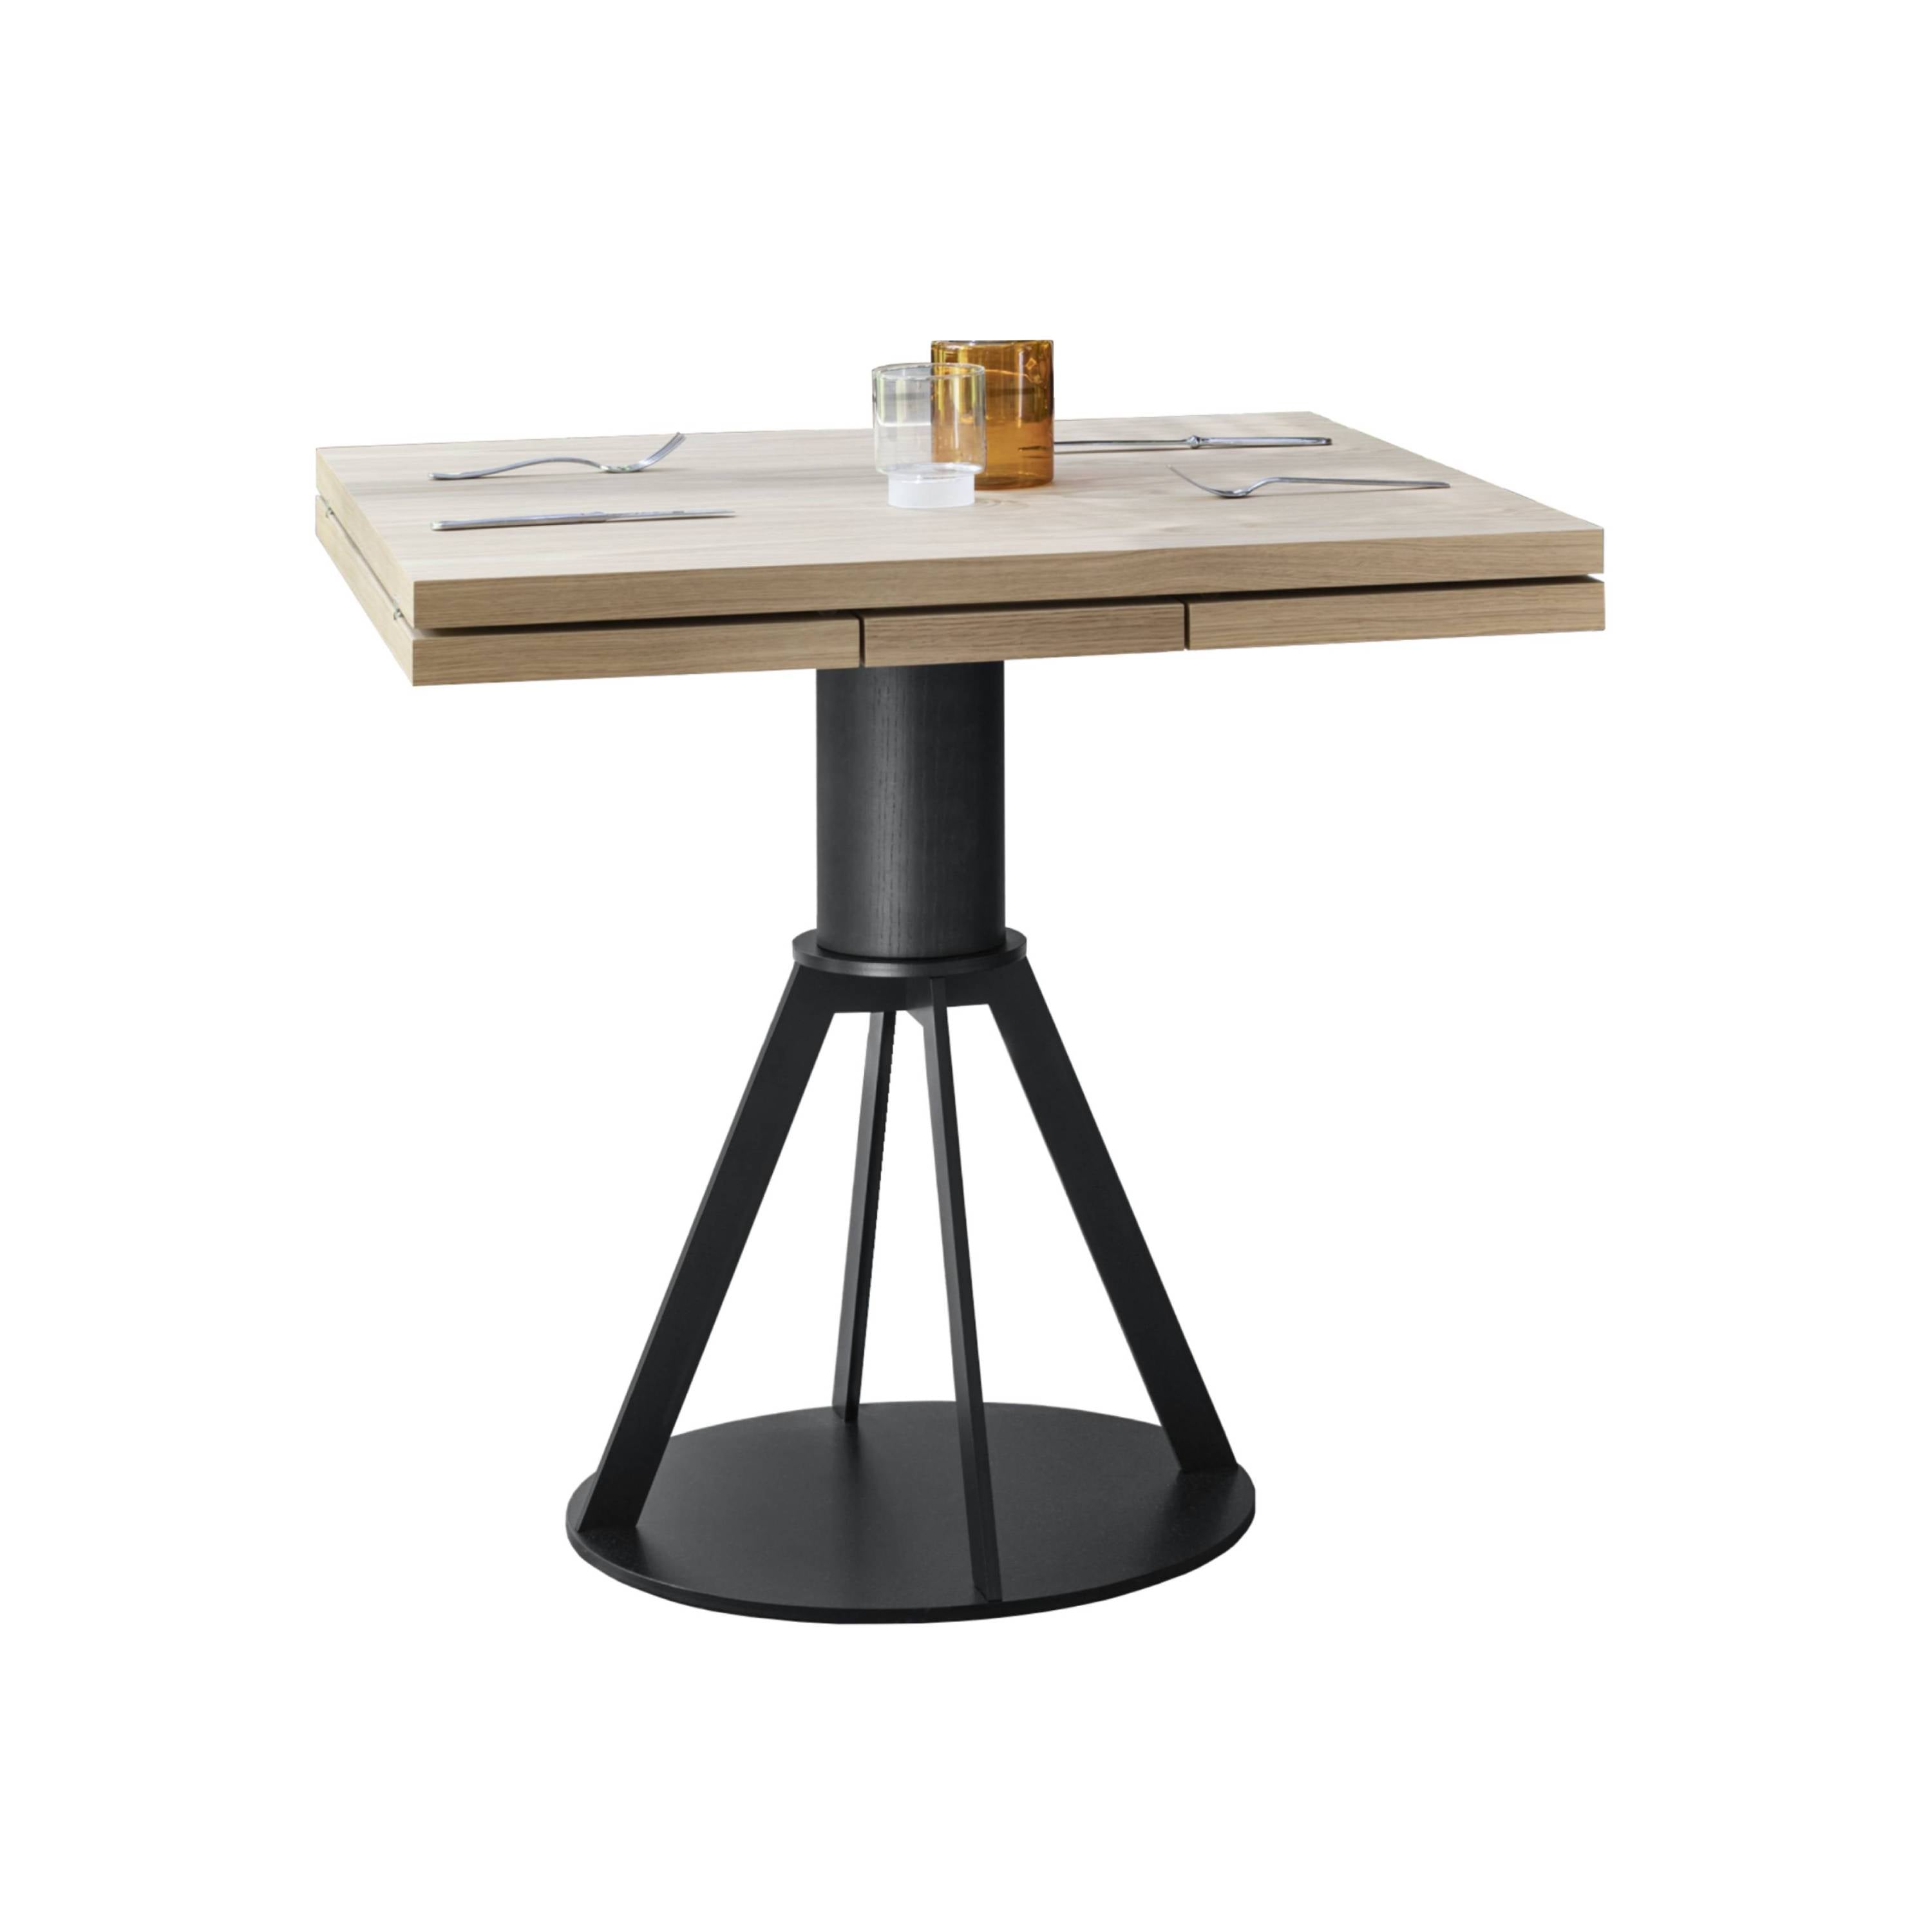 Geronimo Extendable Small Dining Table: Wood + Flamed Oak + Black Ash + Lacquered Black